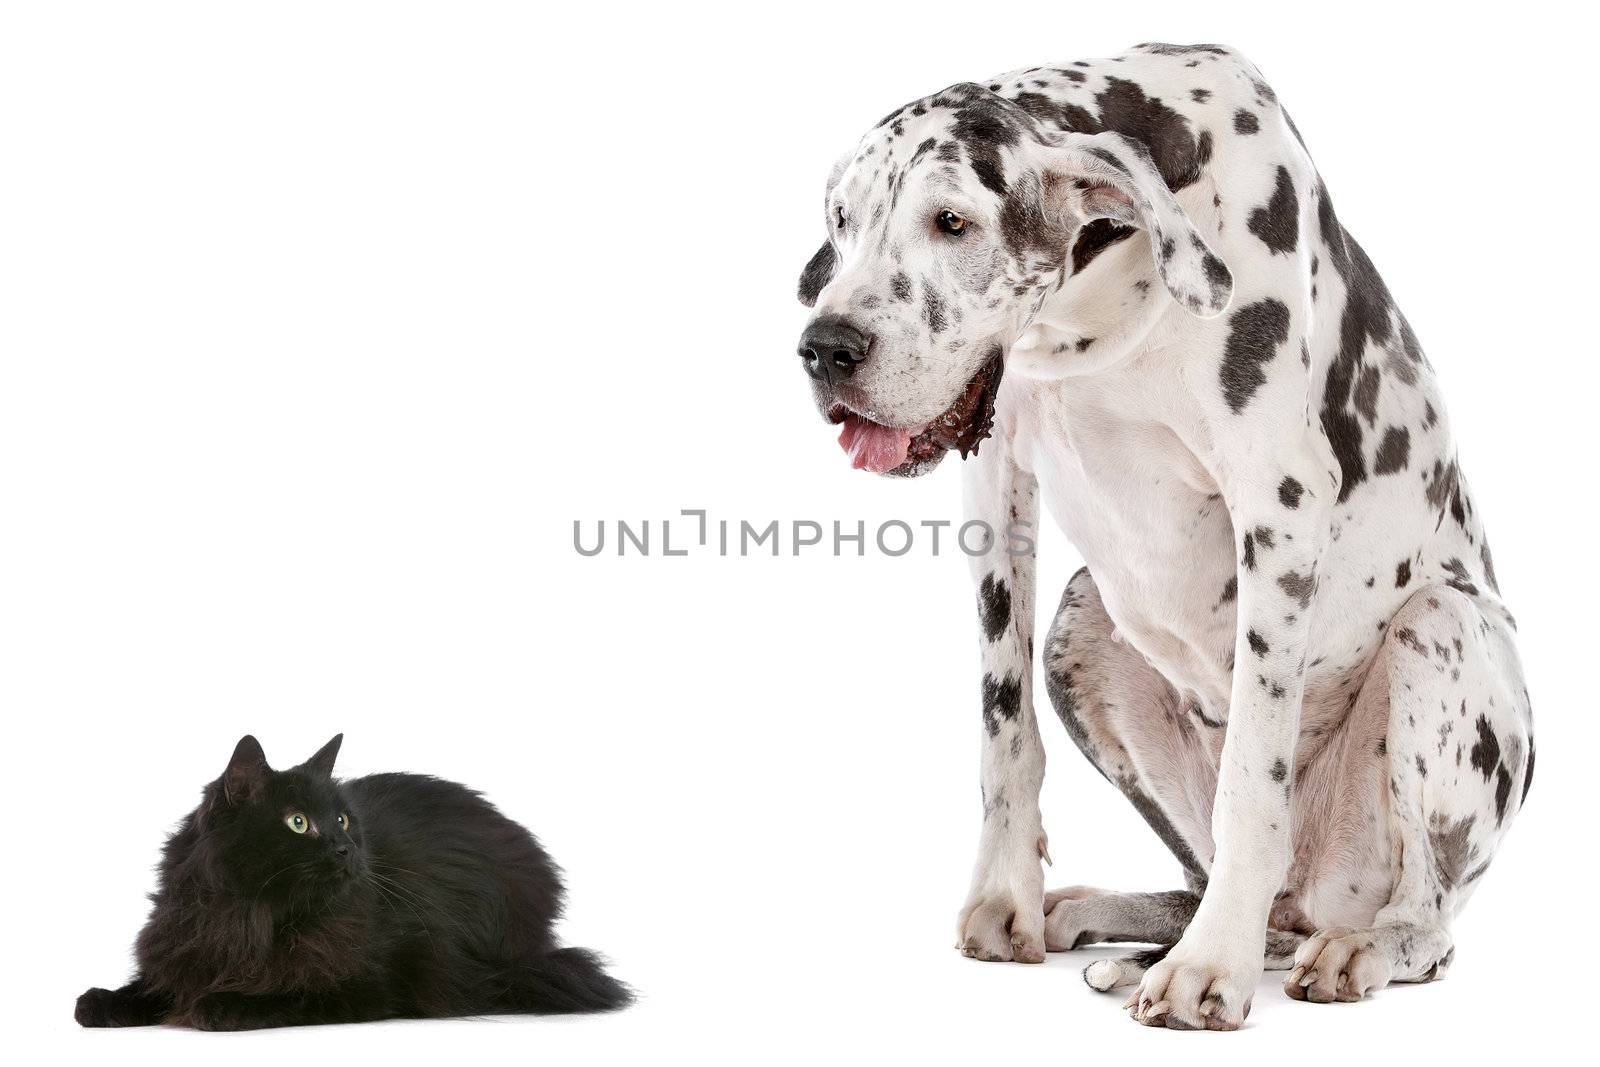 Cat and Dog by eriklam